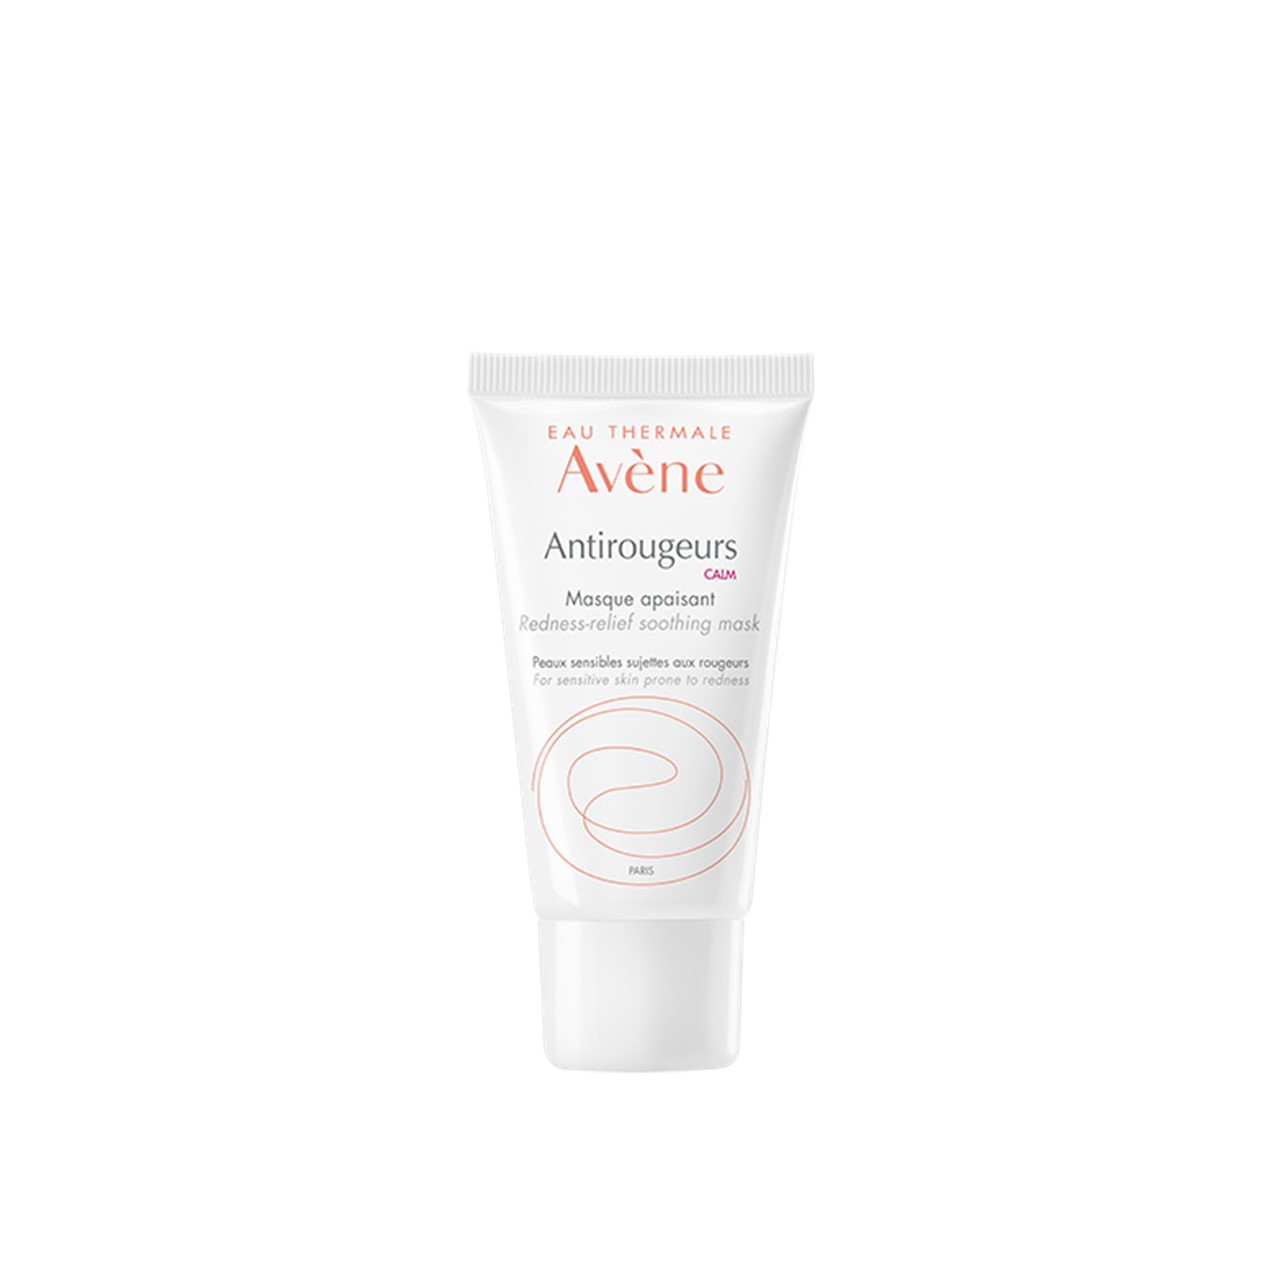 Avène Antirougeurs Calm Redness-Relief Soothing Mask 50ml